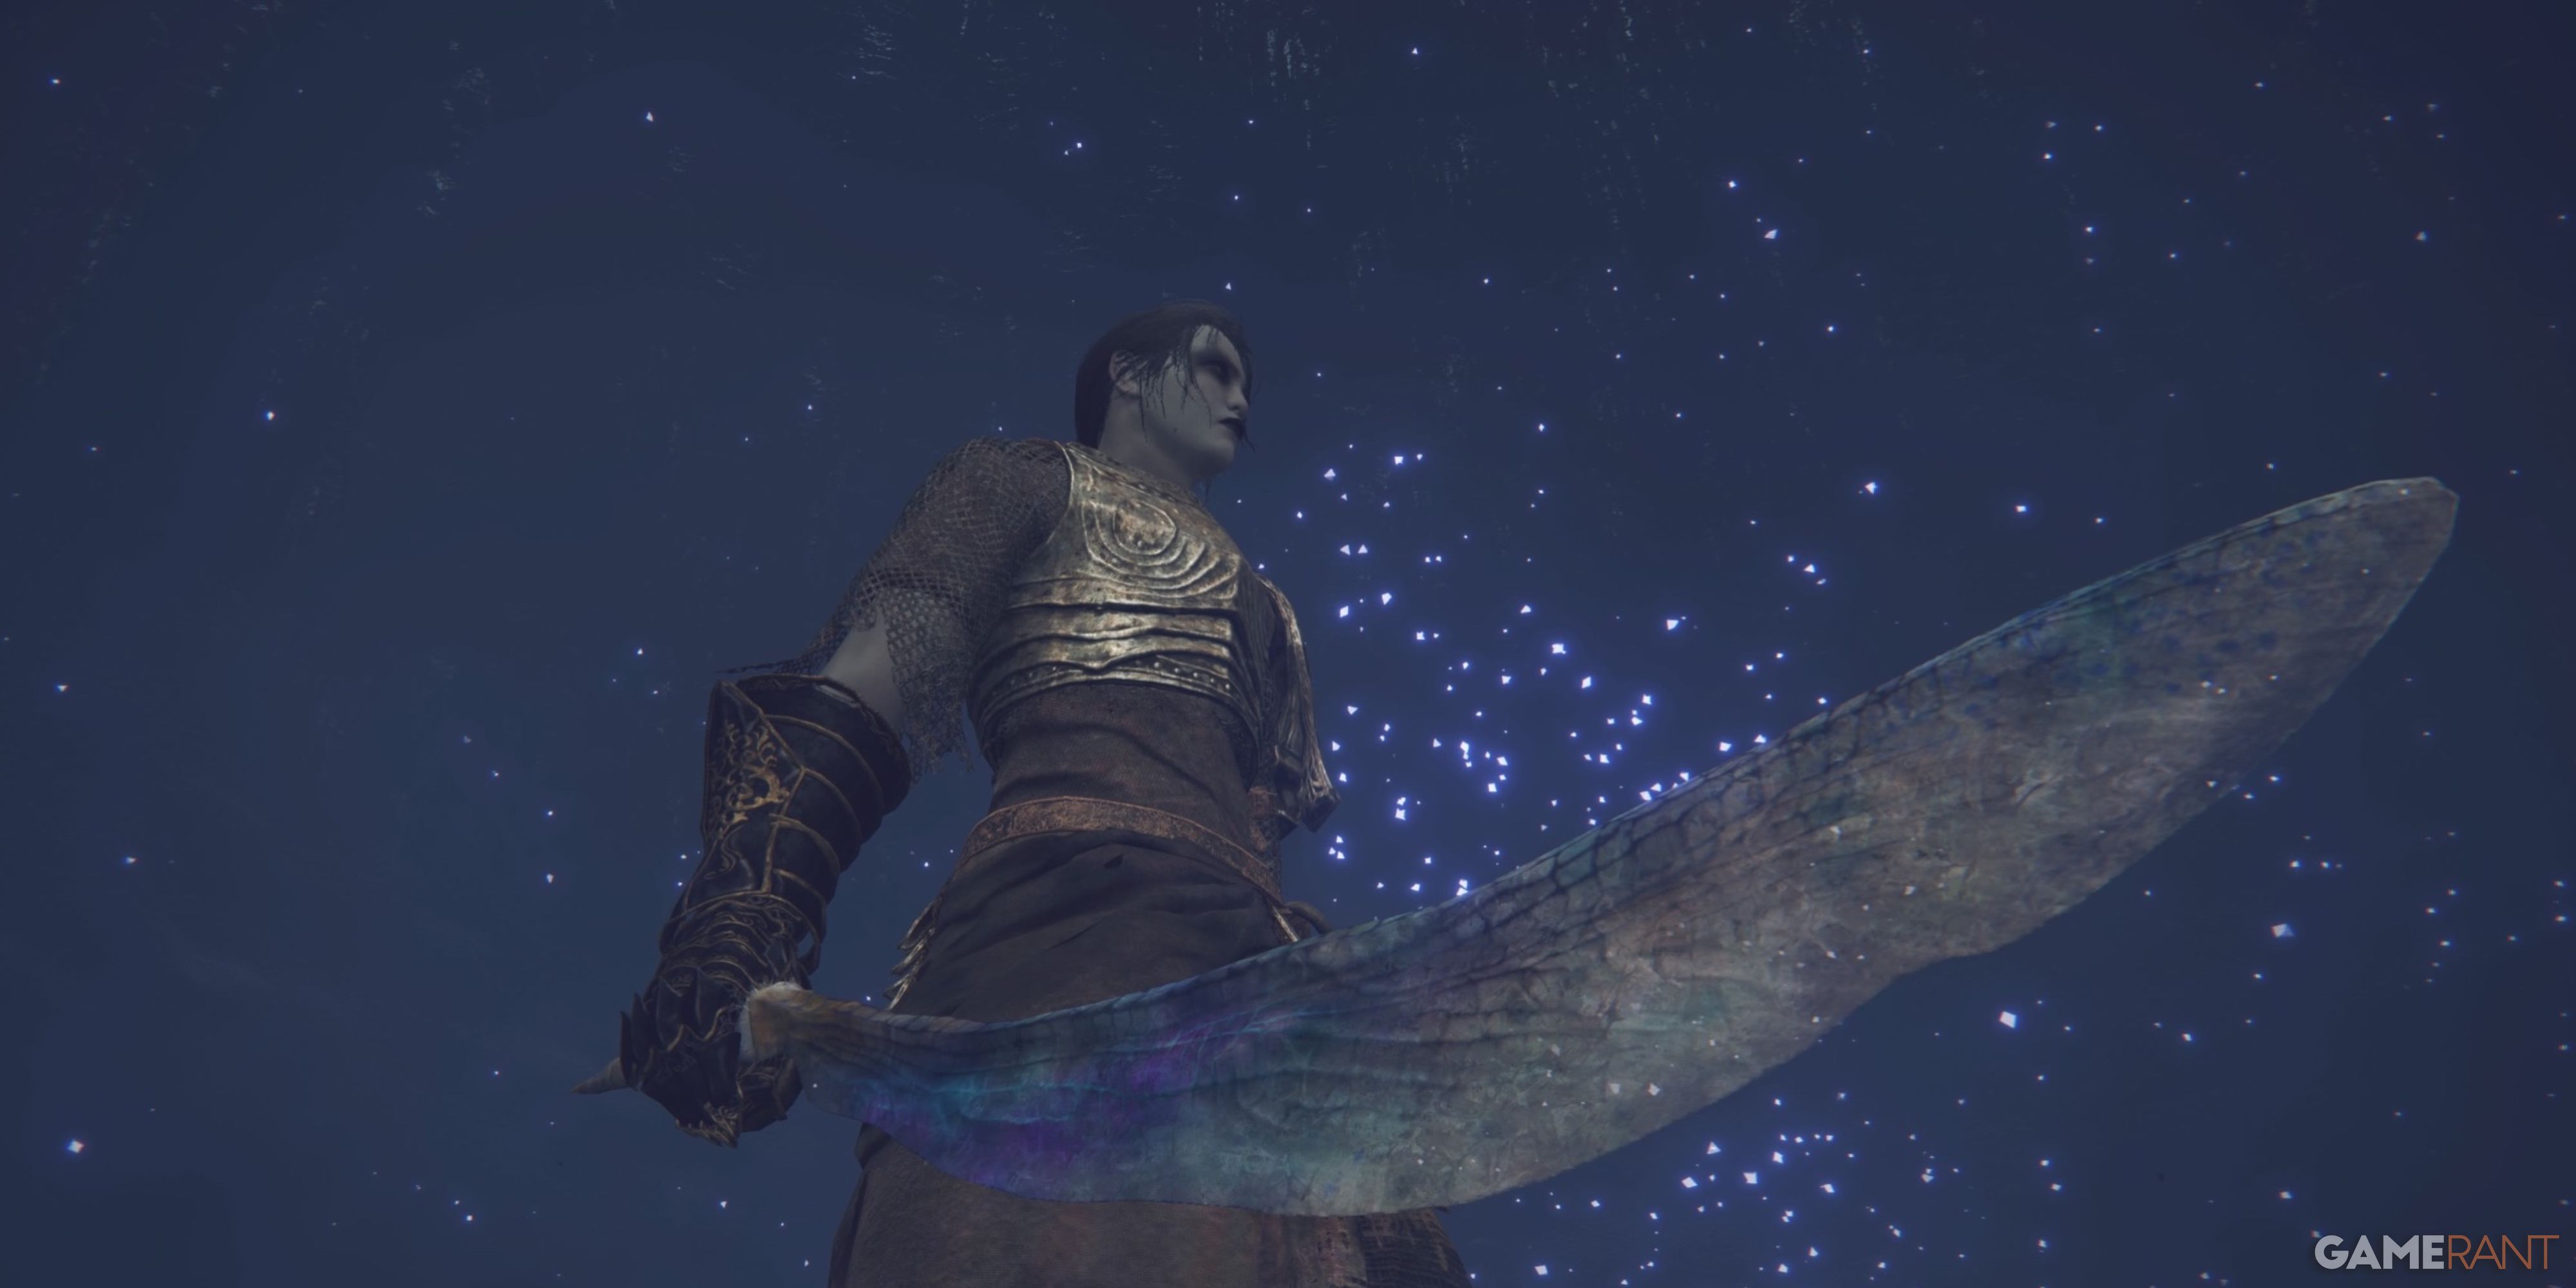 Elden Ring player holding the Wing of Astel with a ceiling looking like the night sky in the background